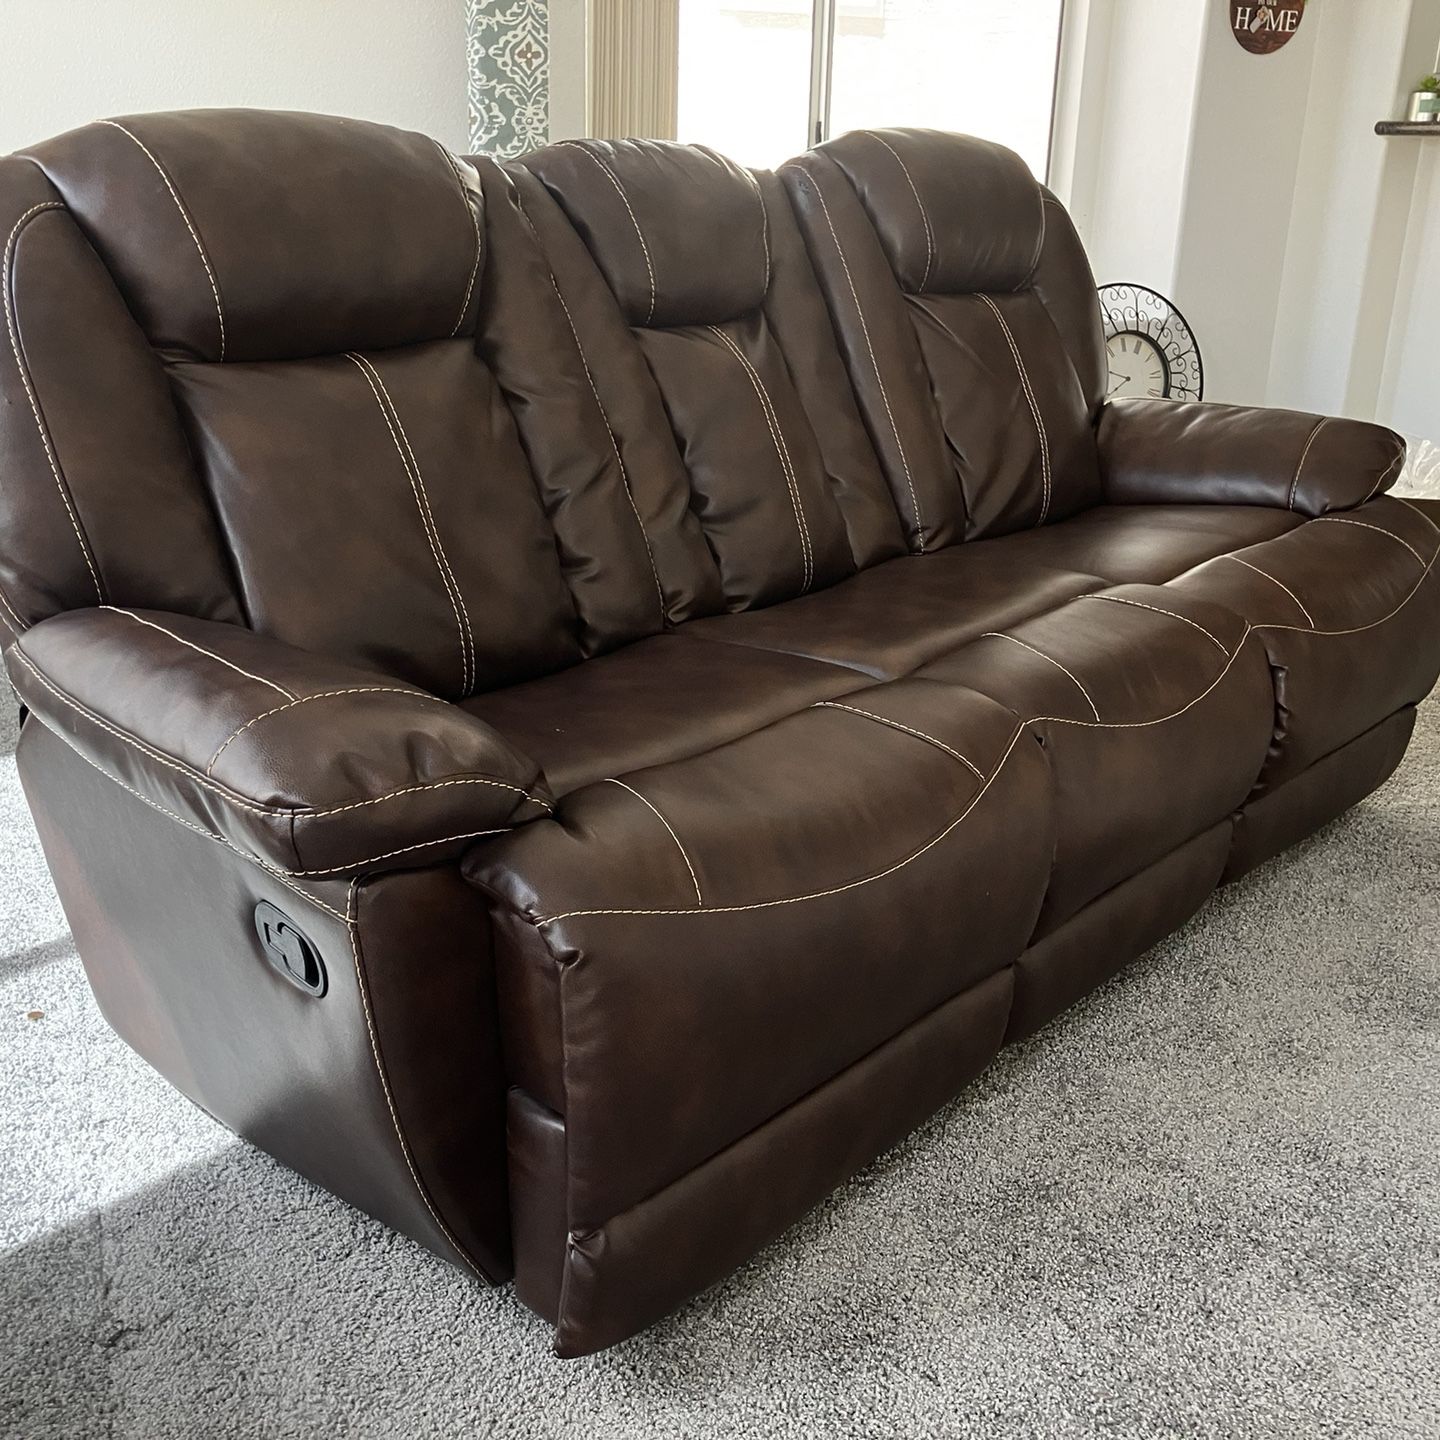 DELIVERY 🚚😀Nice Brown Double Recliner Couch! 